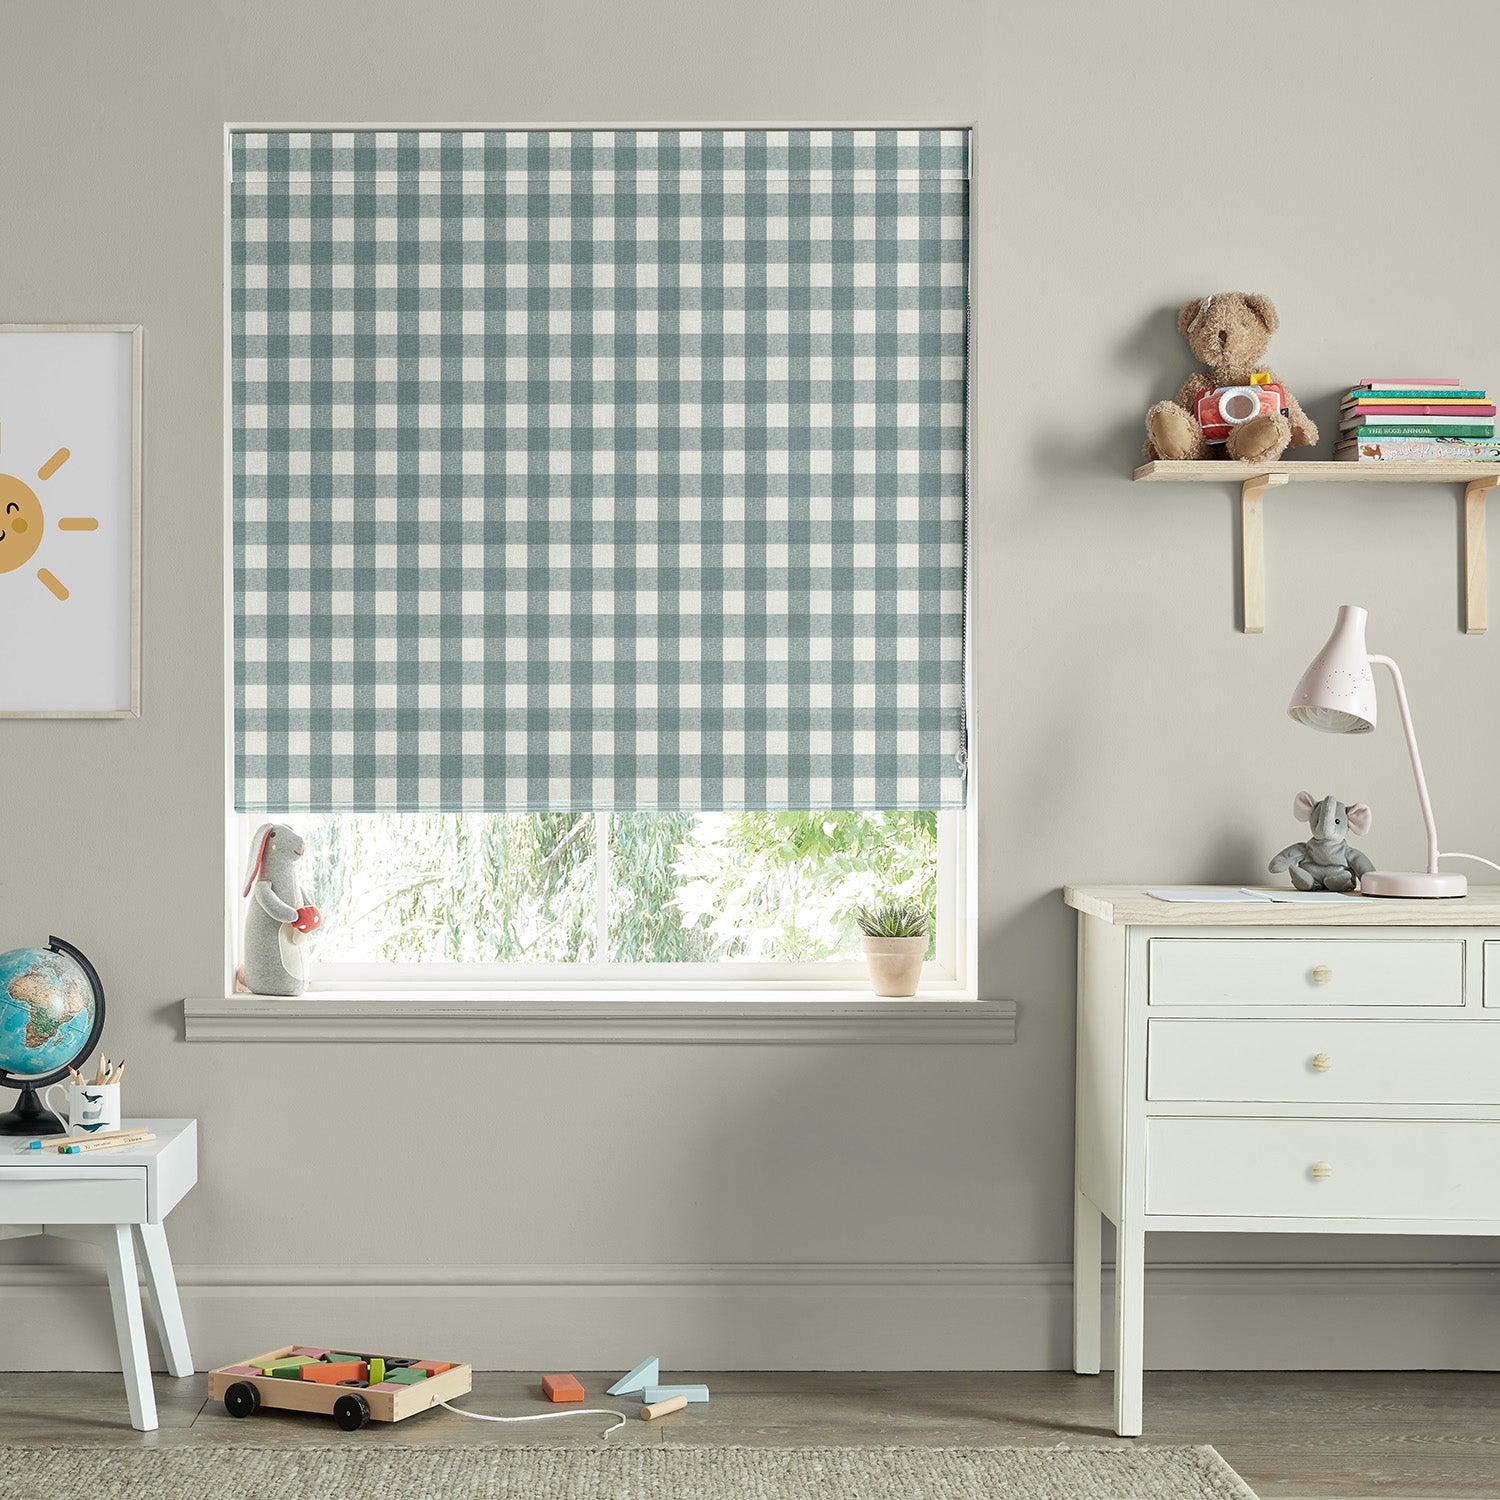 Gingham Teal Made to Measure Roman Blind